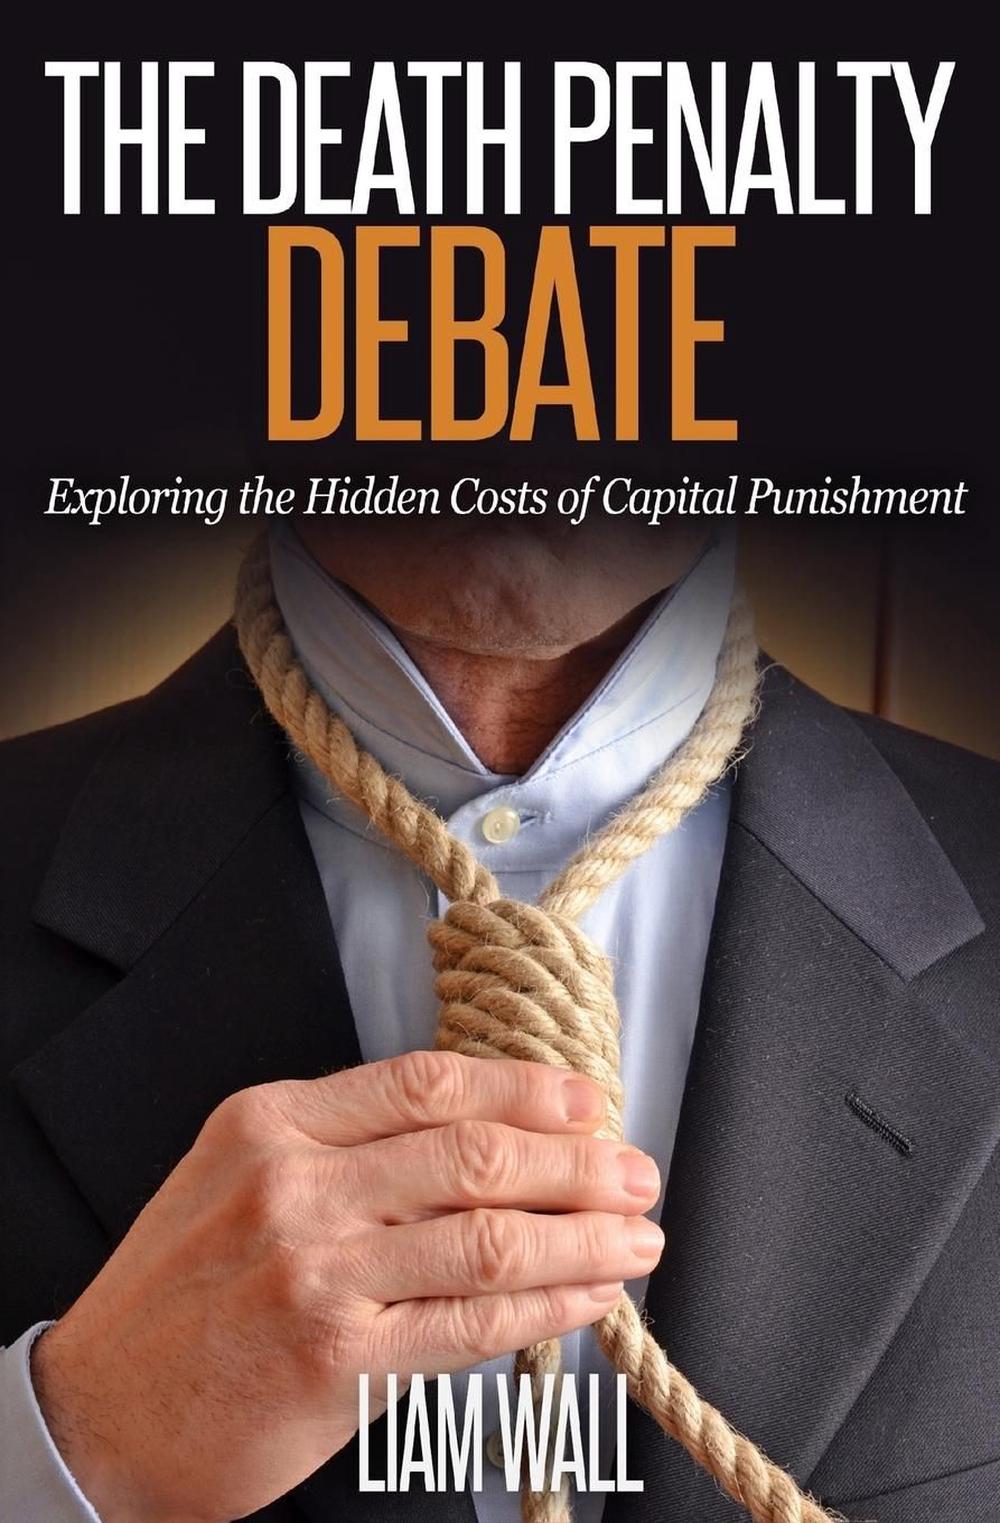 The Controversy Of Capital Punishment